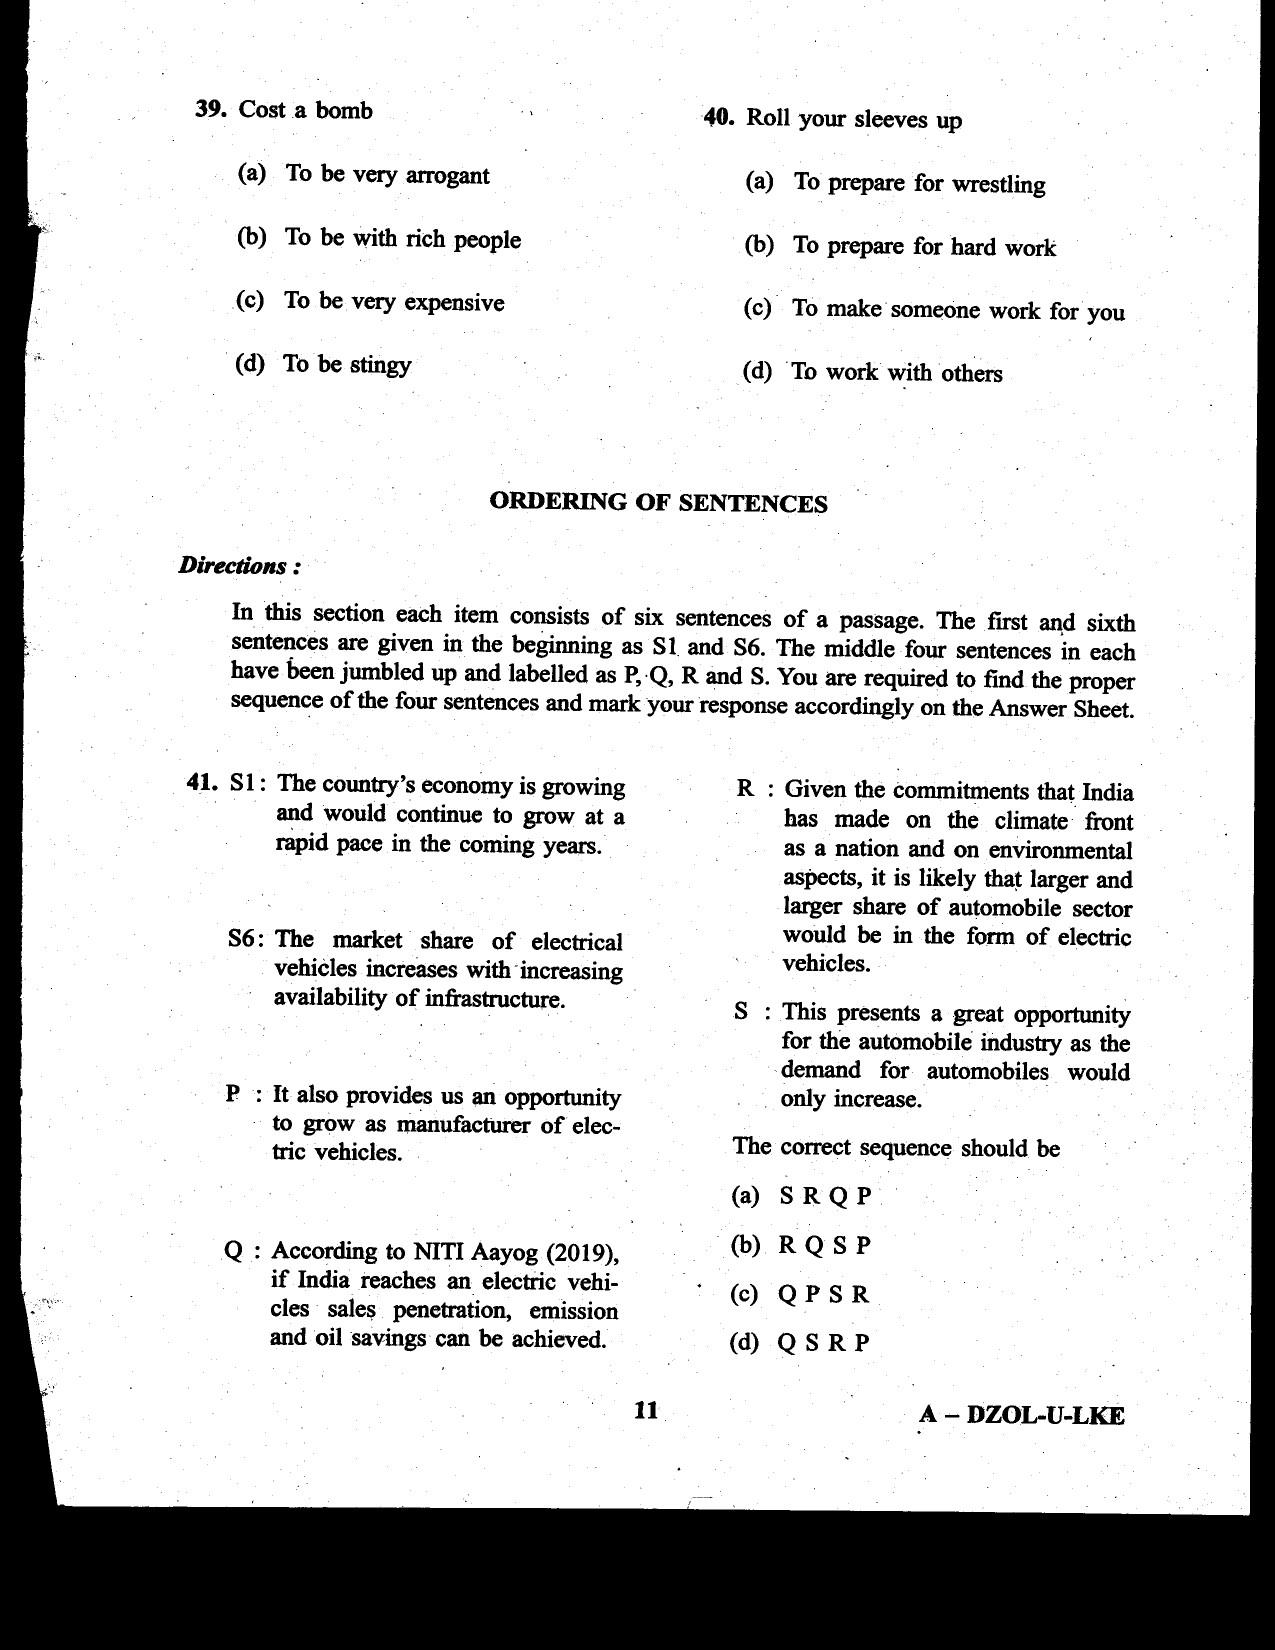 CDS II Examination 2020 English Question Paper - Image 11